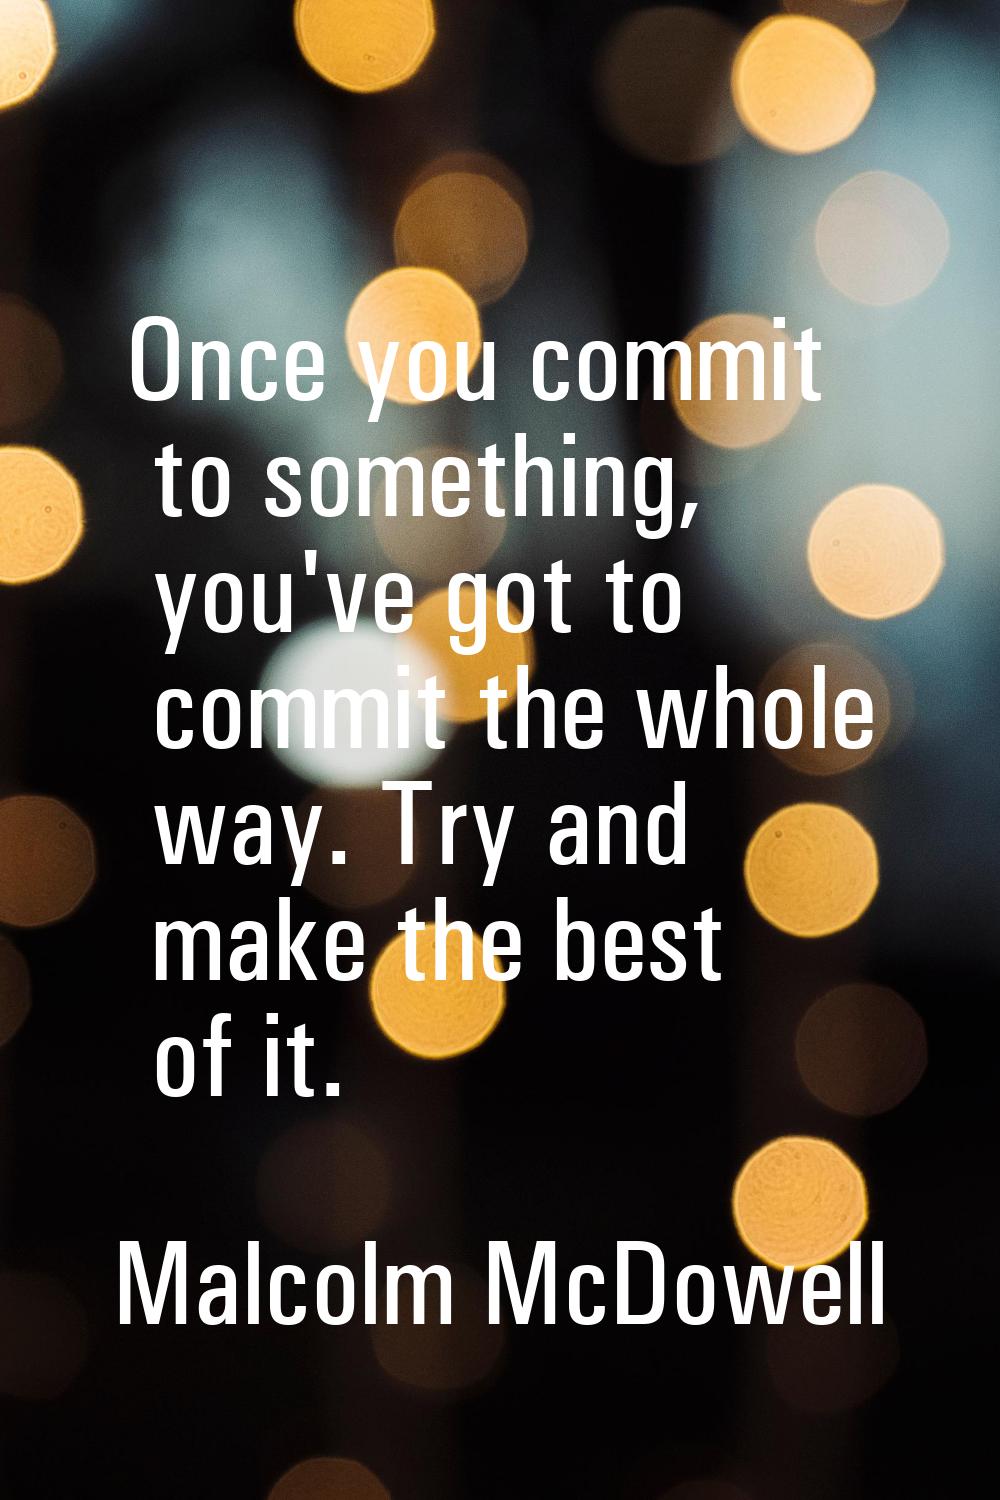 Once you commit to something, you've got to commit the whole way. Try and make the best of it.